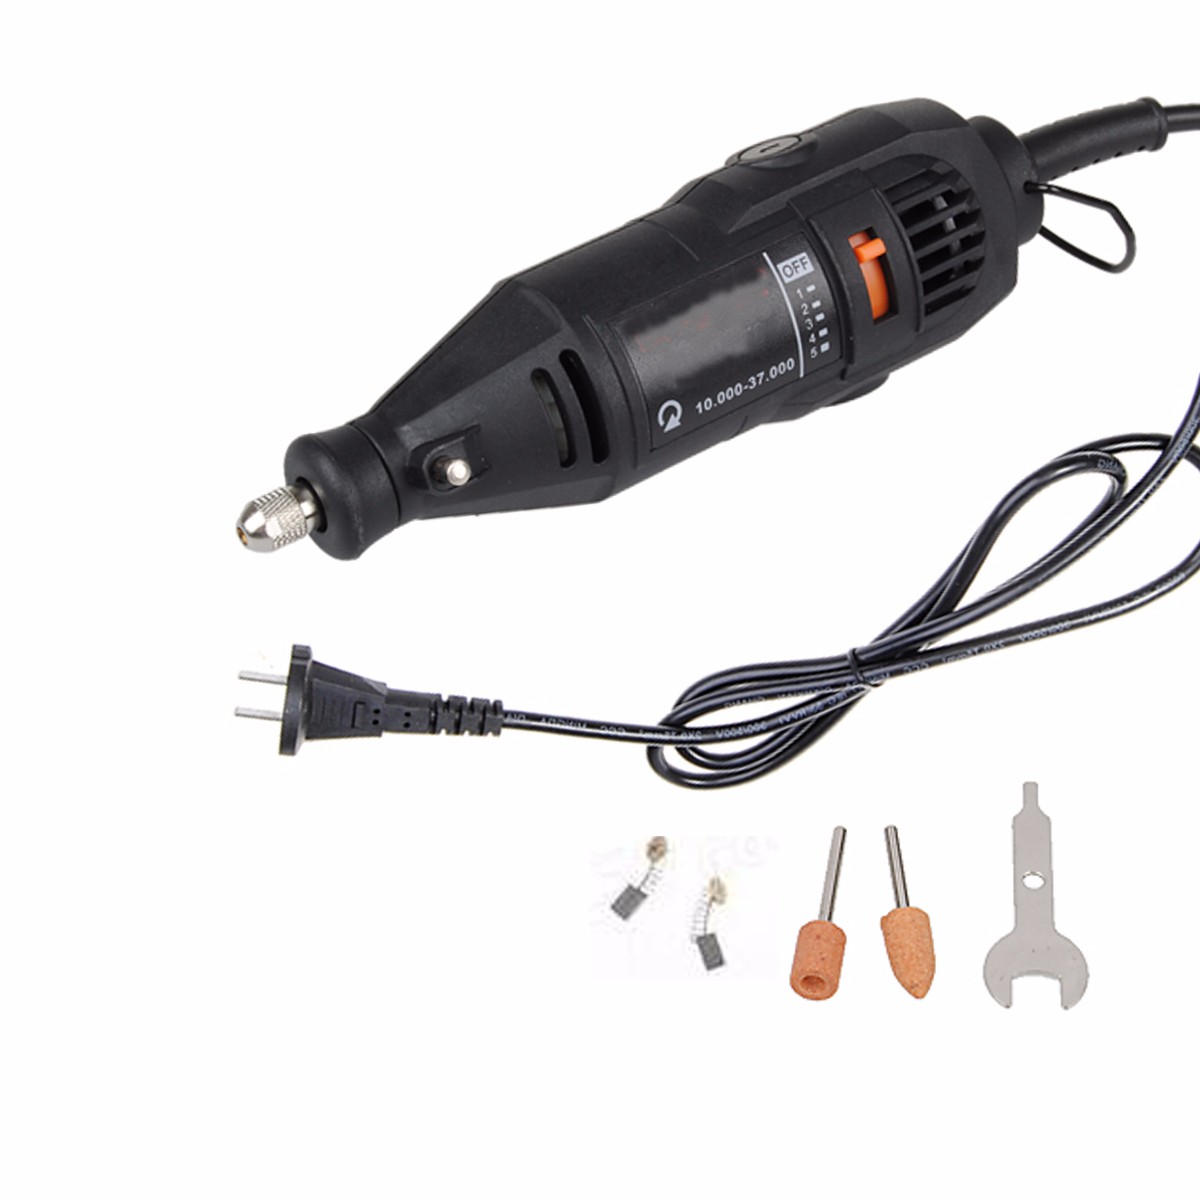 MultiPro-110V-Electric-Grinder-Rotary-Variable-Speed-Power-Tool-1192369